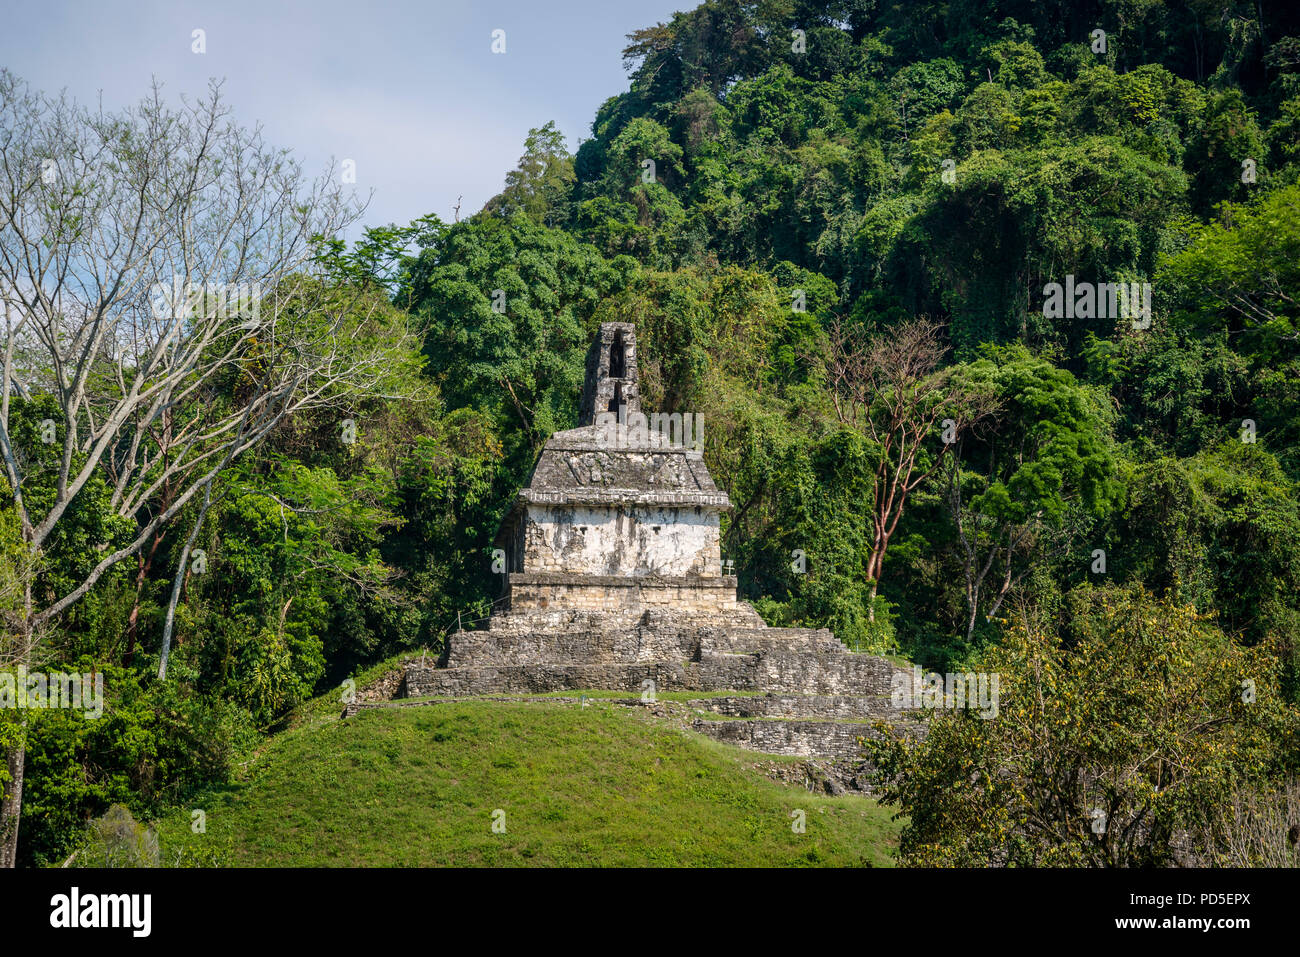 Palenque, ruins of Maya city in southern Mexico, Chiapas, Mexico Stock Photo